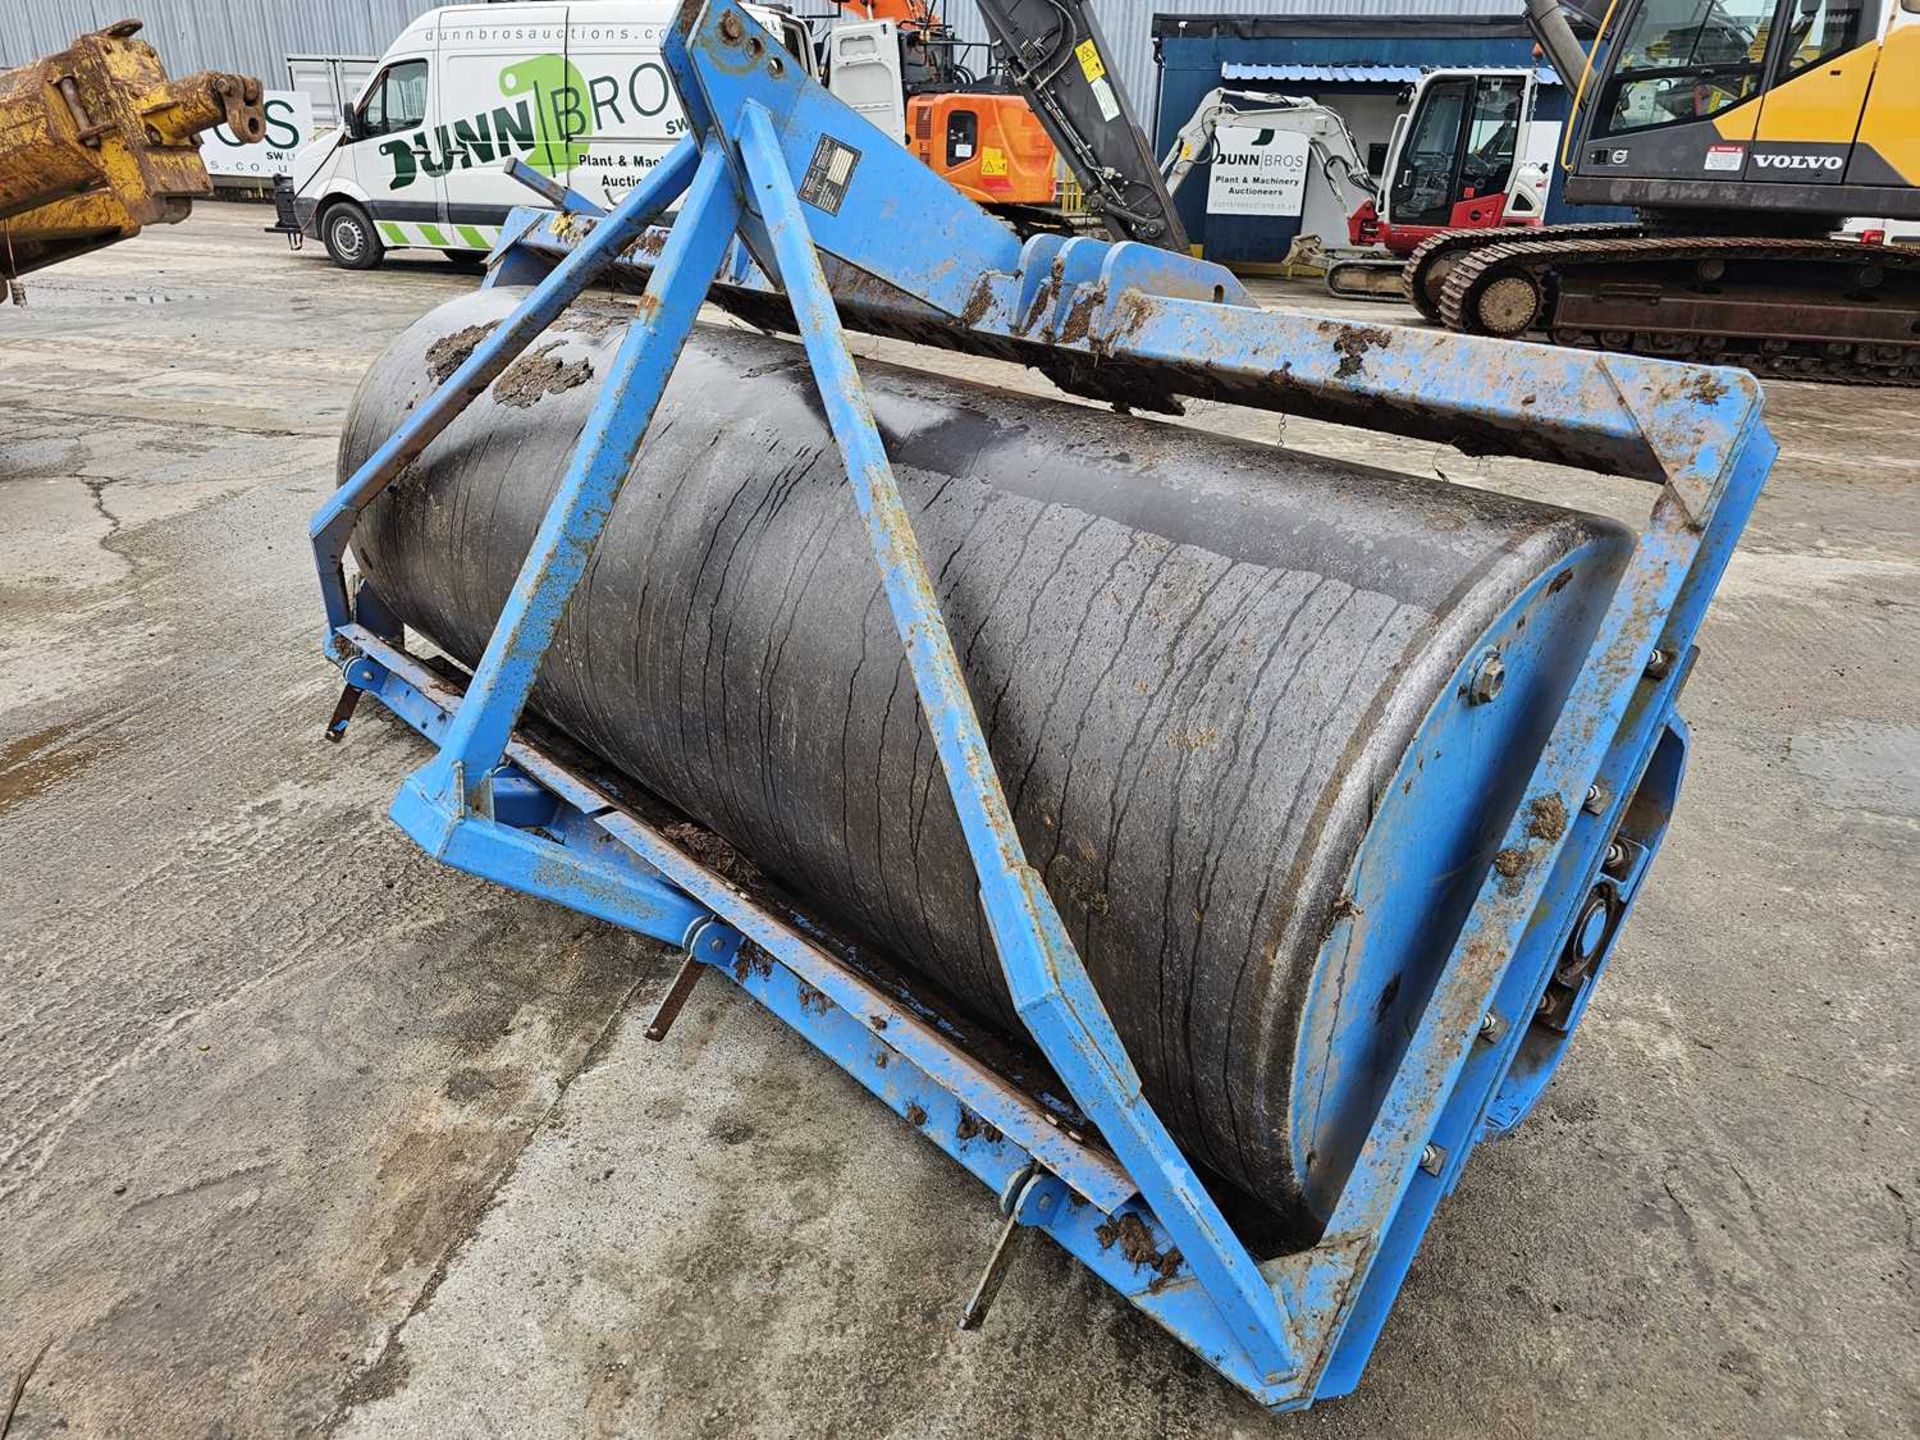 2016 Expom 1200Kg Roller to suit 3 Point Linkage - Image 3 of 9